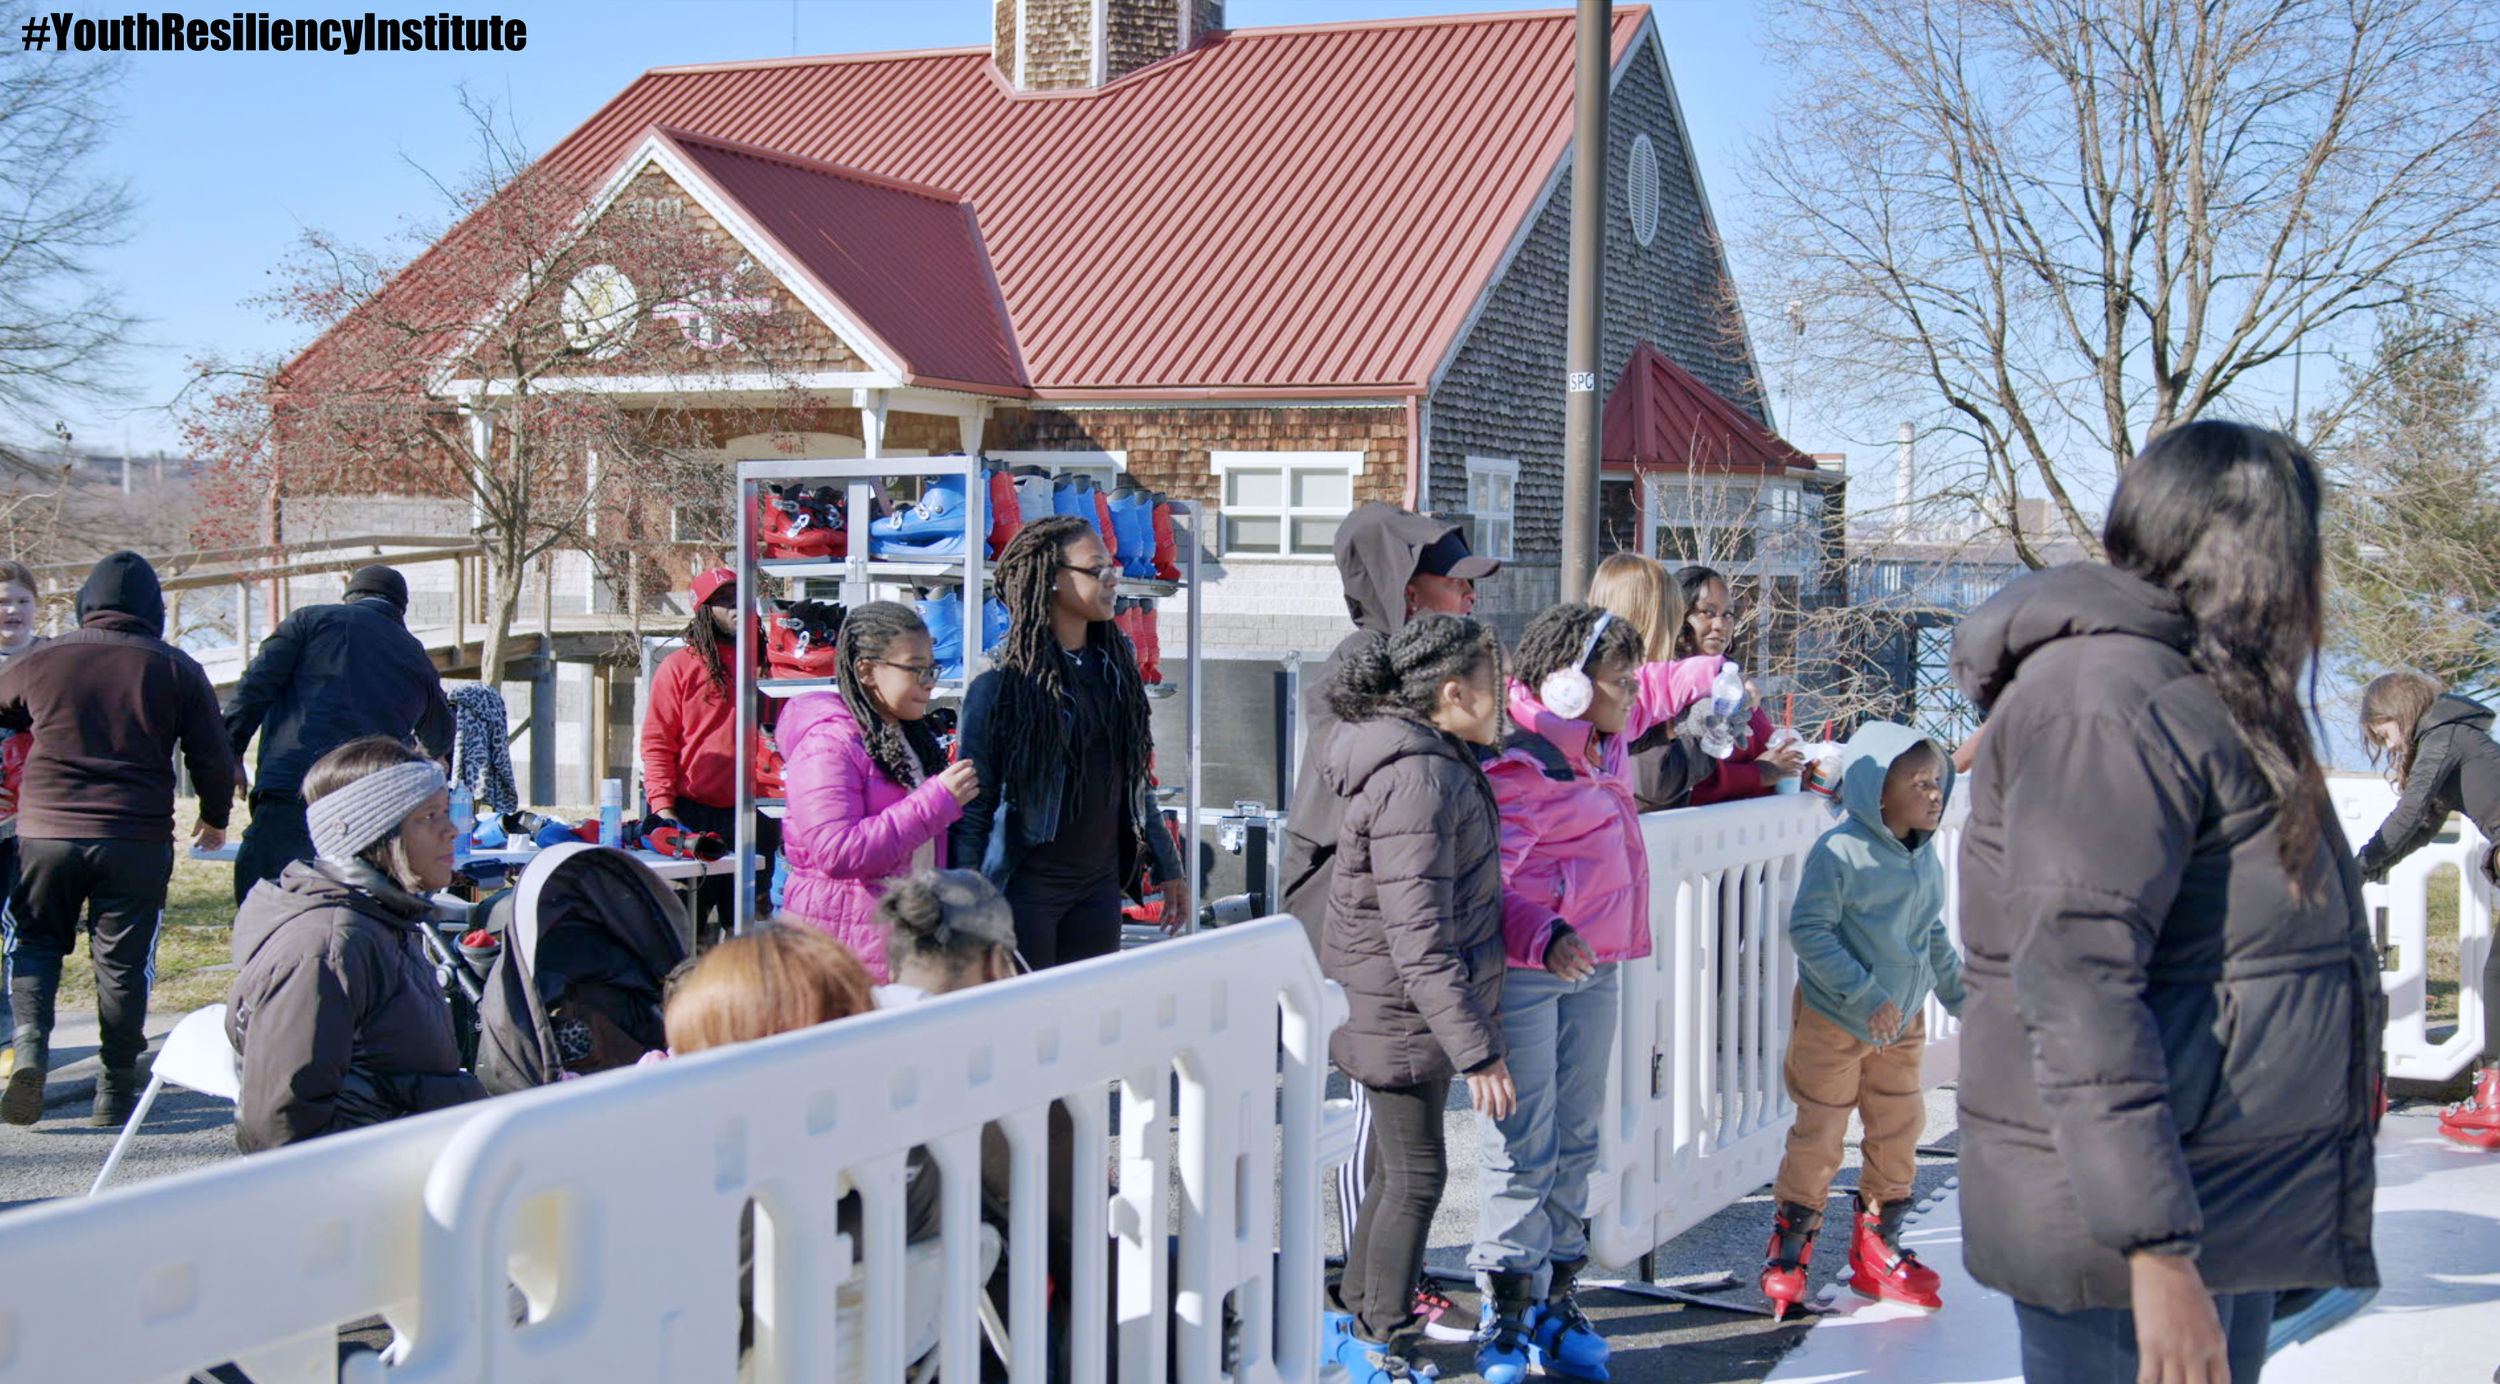  People are enjoying the ice-skating rink in Middle Branch Park with a view of the red roof boathouse in the background. 